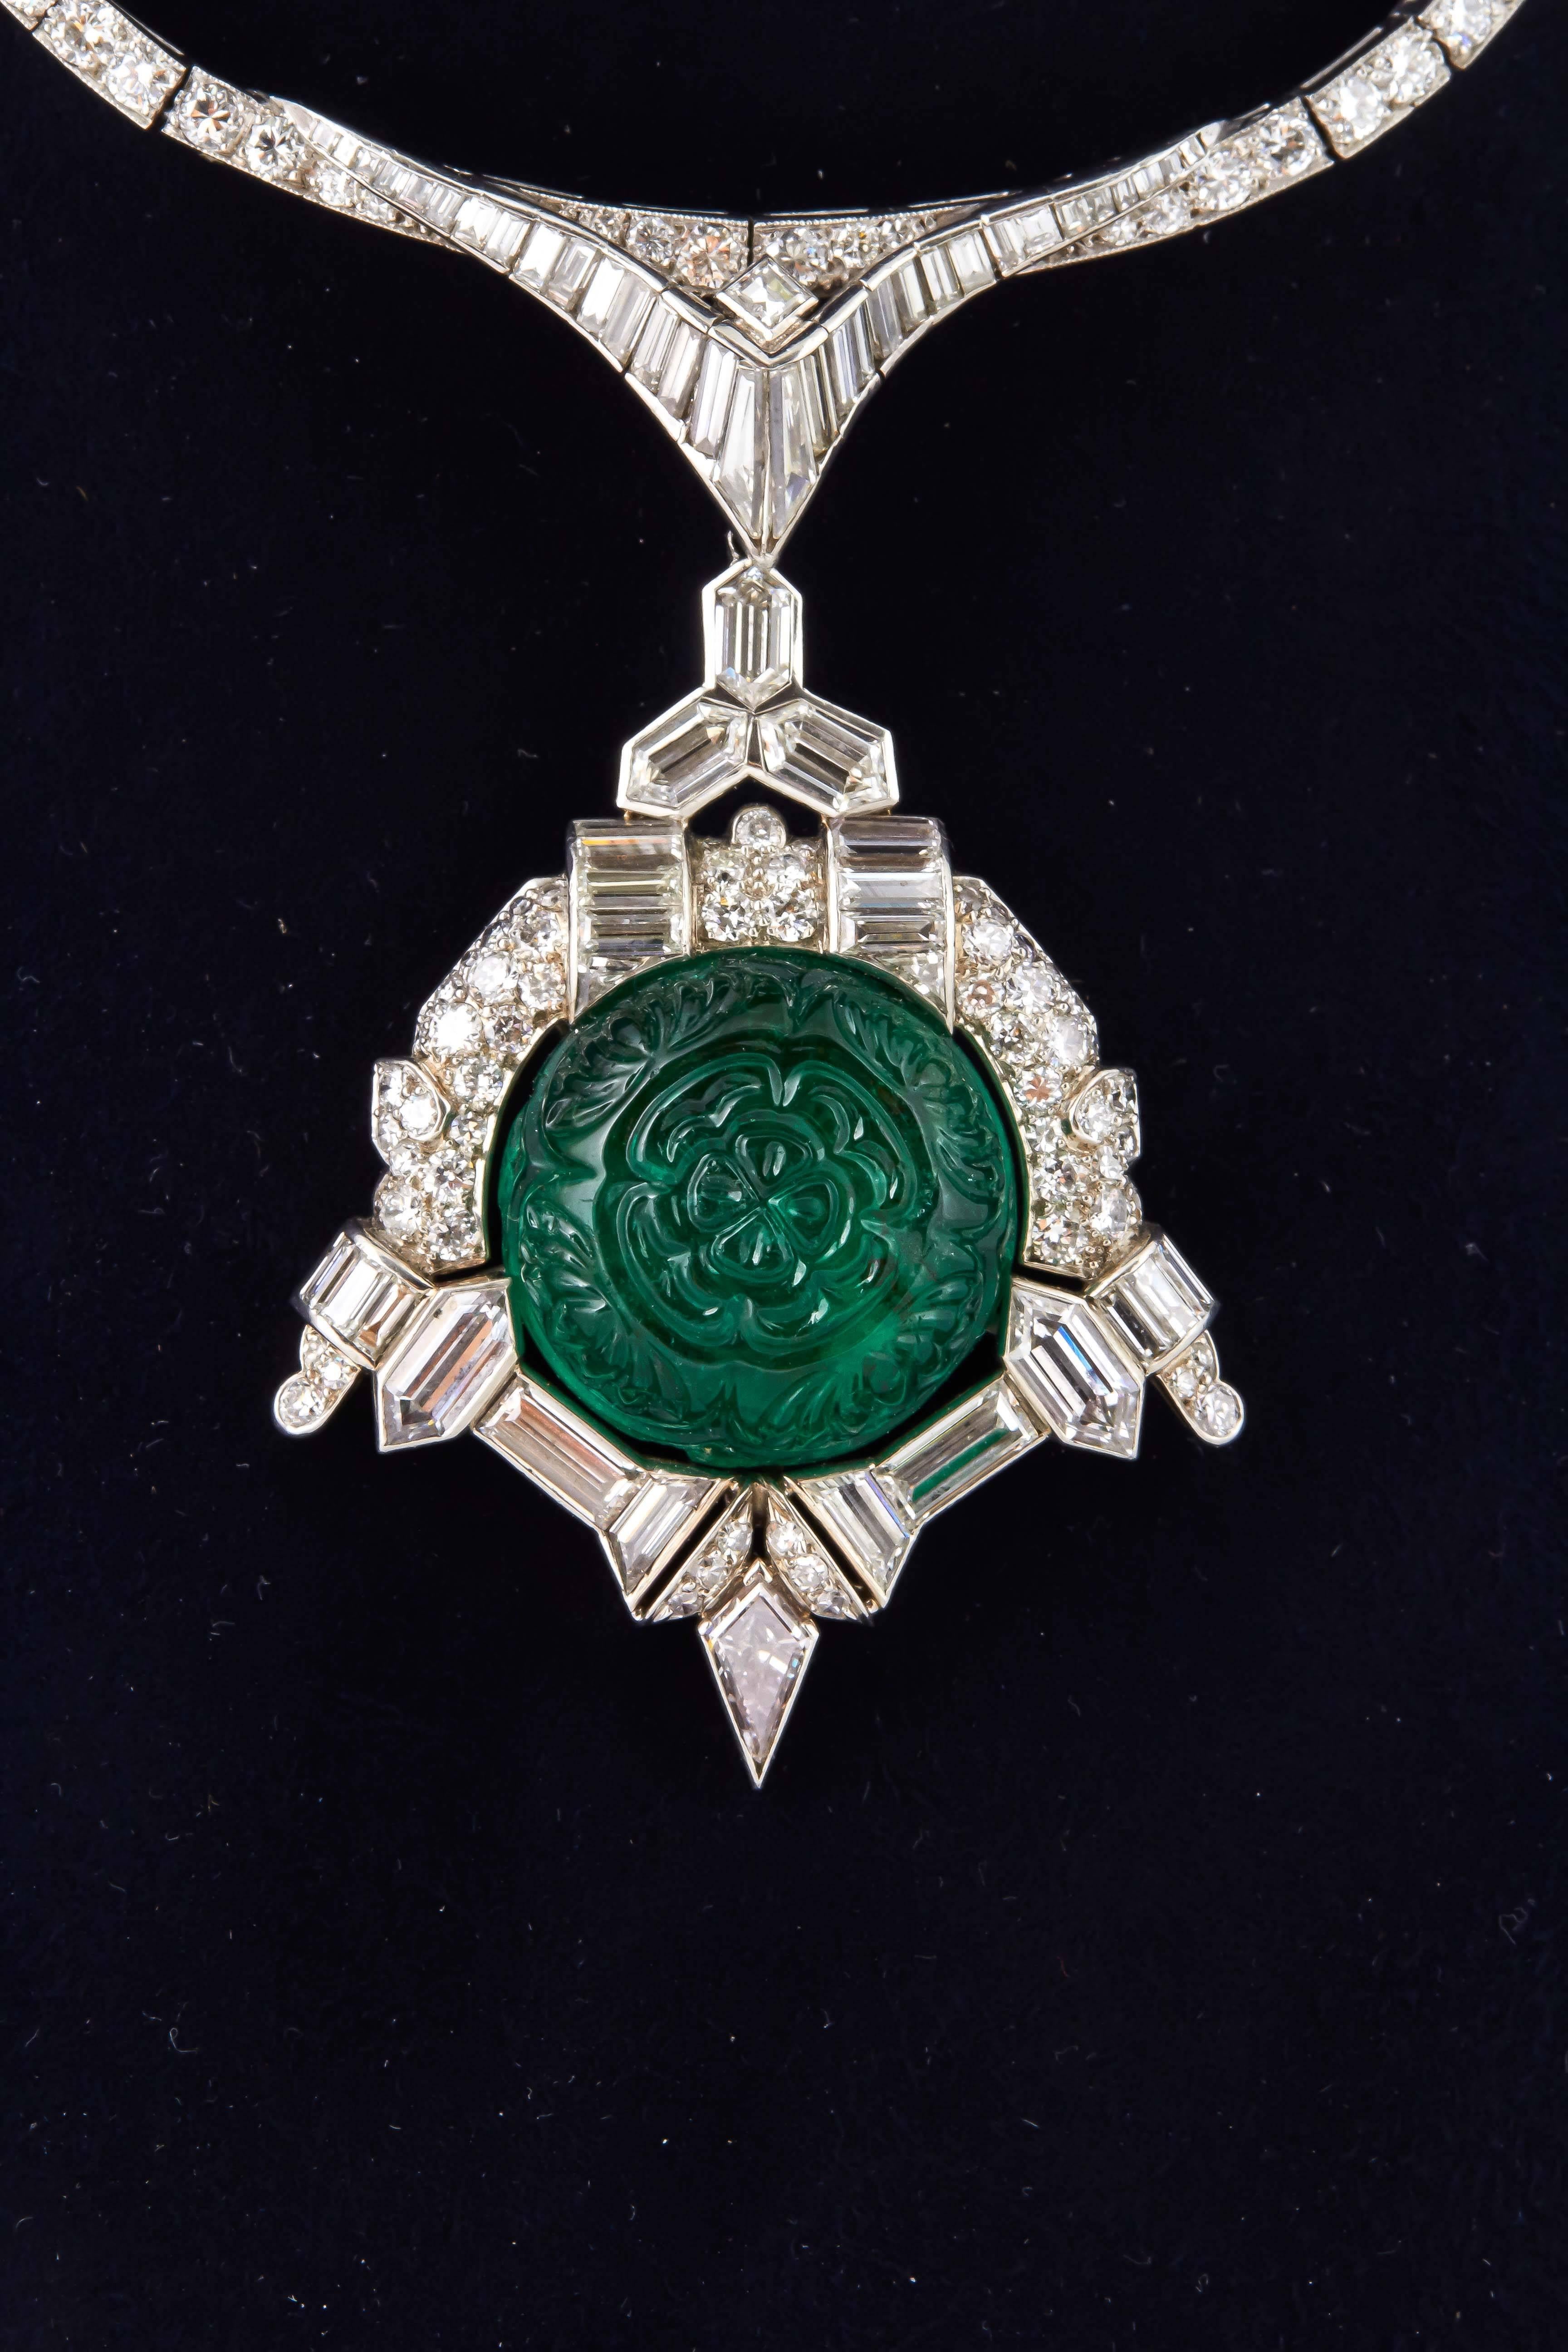 This is a beautiful and unique Antique Art Deco necklace  finely crafted in Platinum with diamonds and detachable diamond and emerald pendant . Carved emerald weighs approximately 35.00 carats and diamonds weighing a total of approximately 30.00